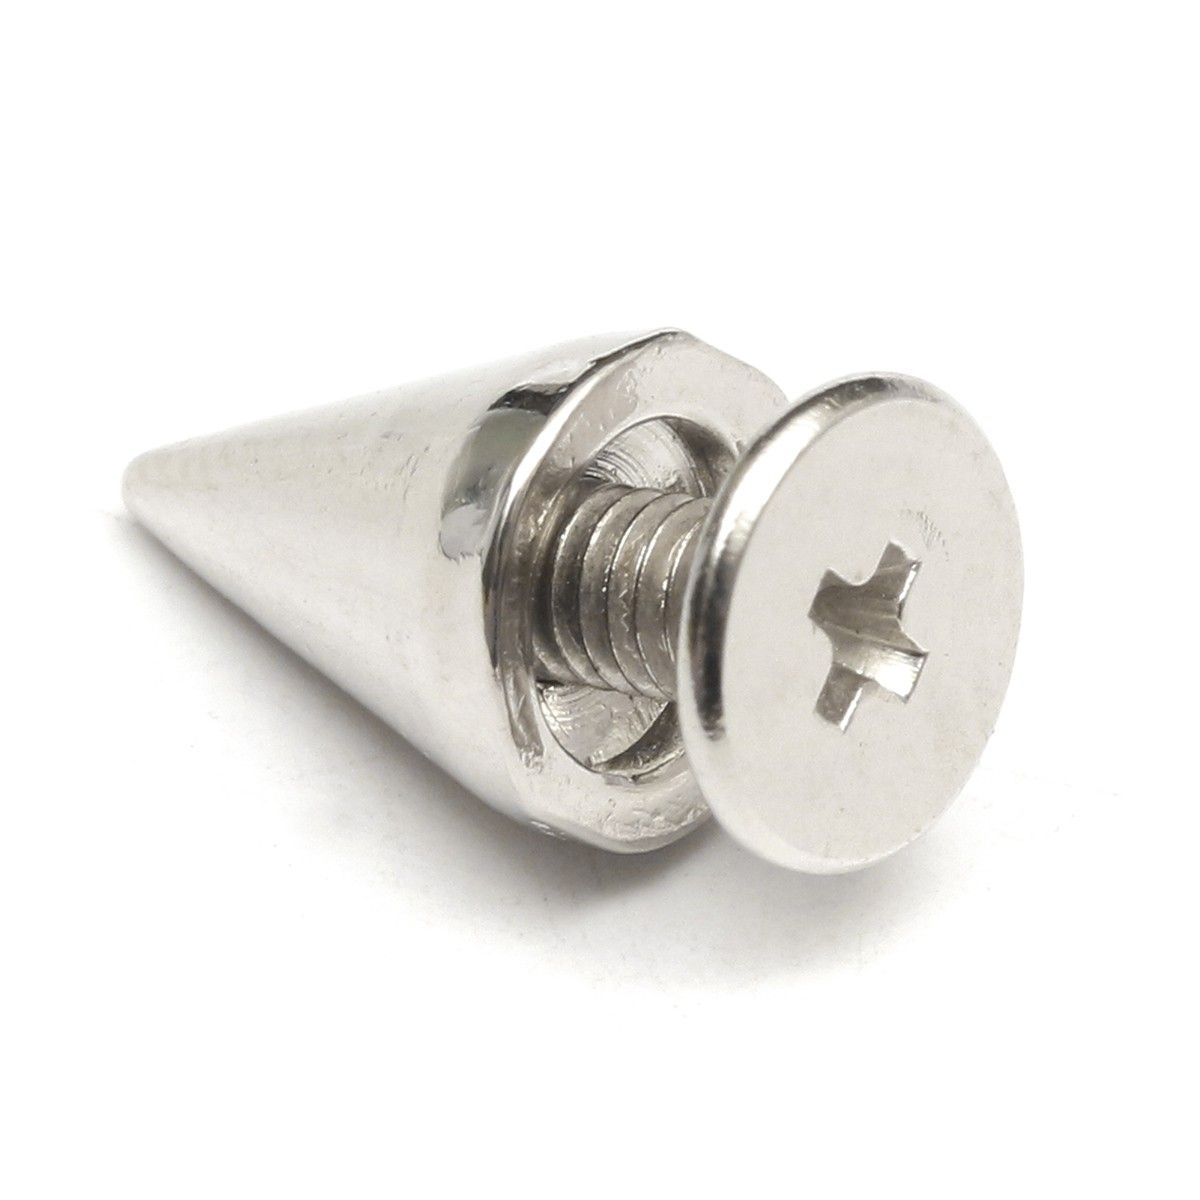 100Pcs-7x10mm-Metal-Silver-Studs-Rivet-Bullet-Spike-Cone-Screw-For-Leather-Craft-1106797